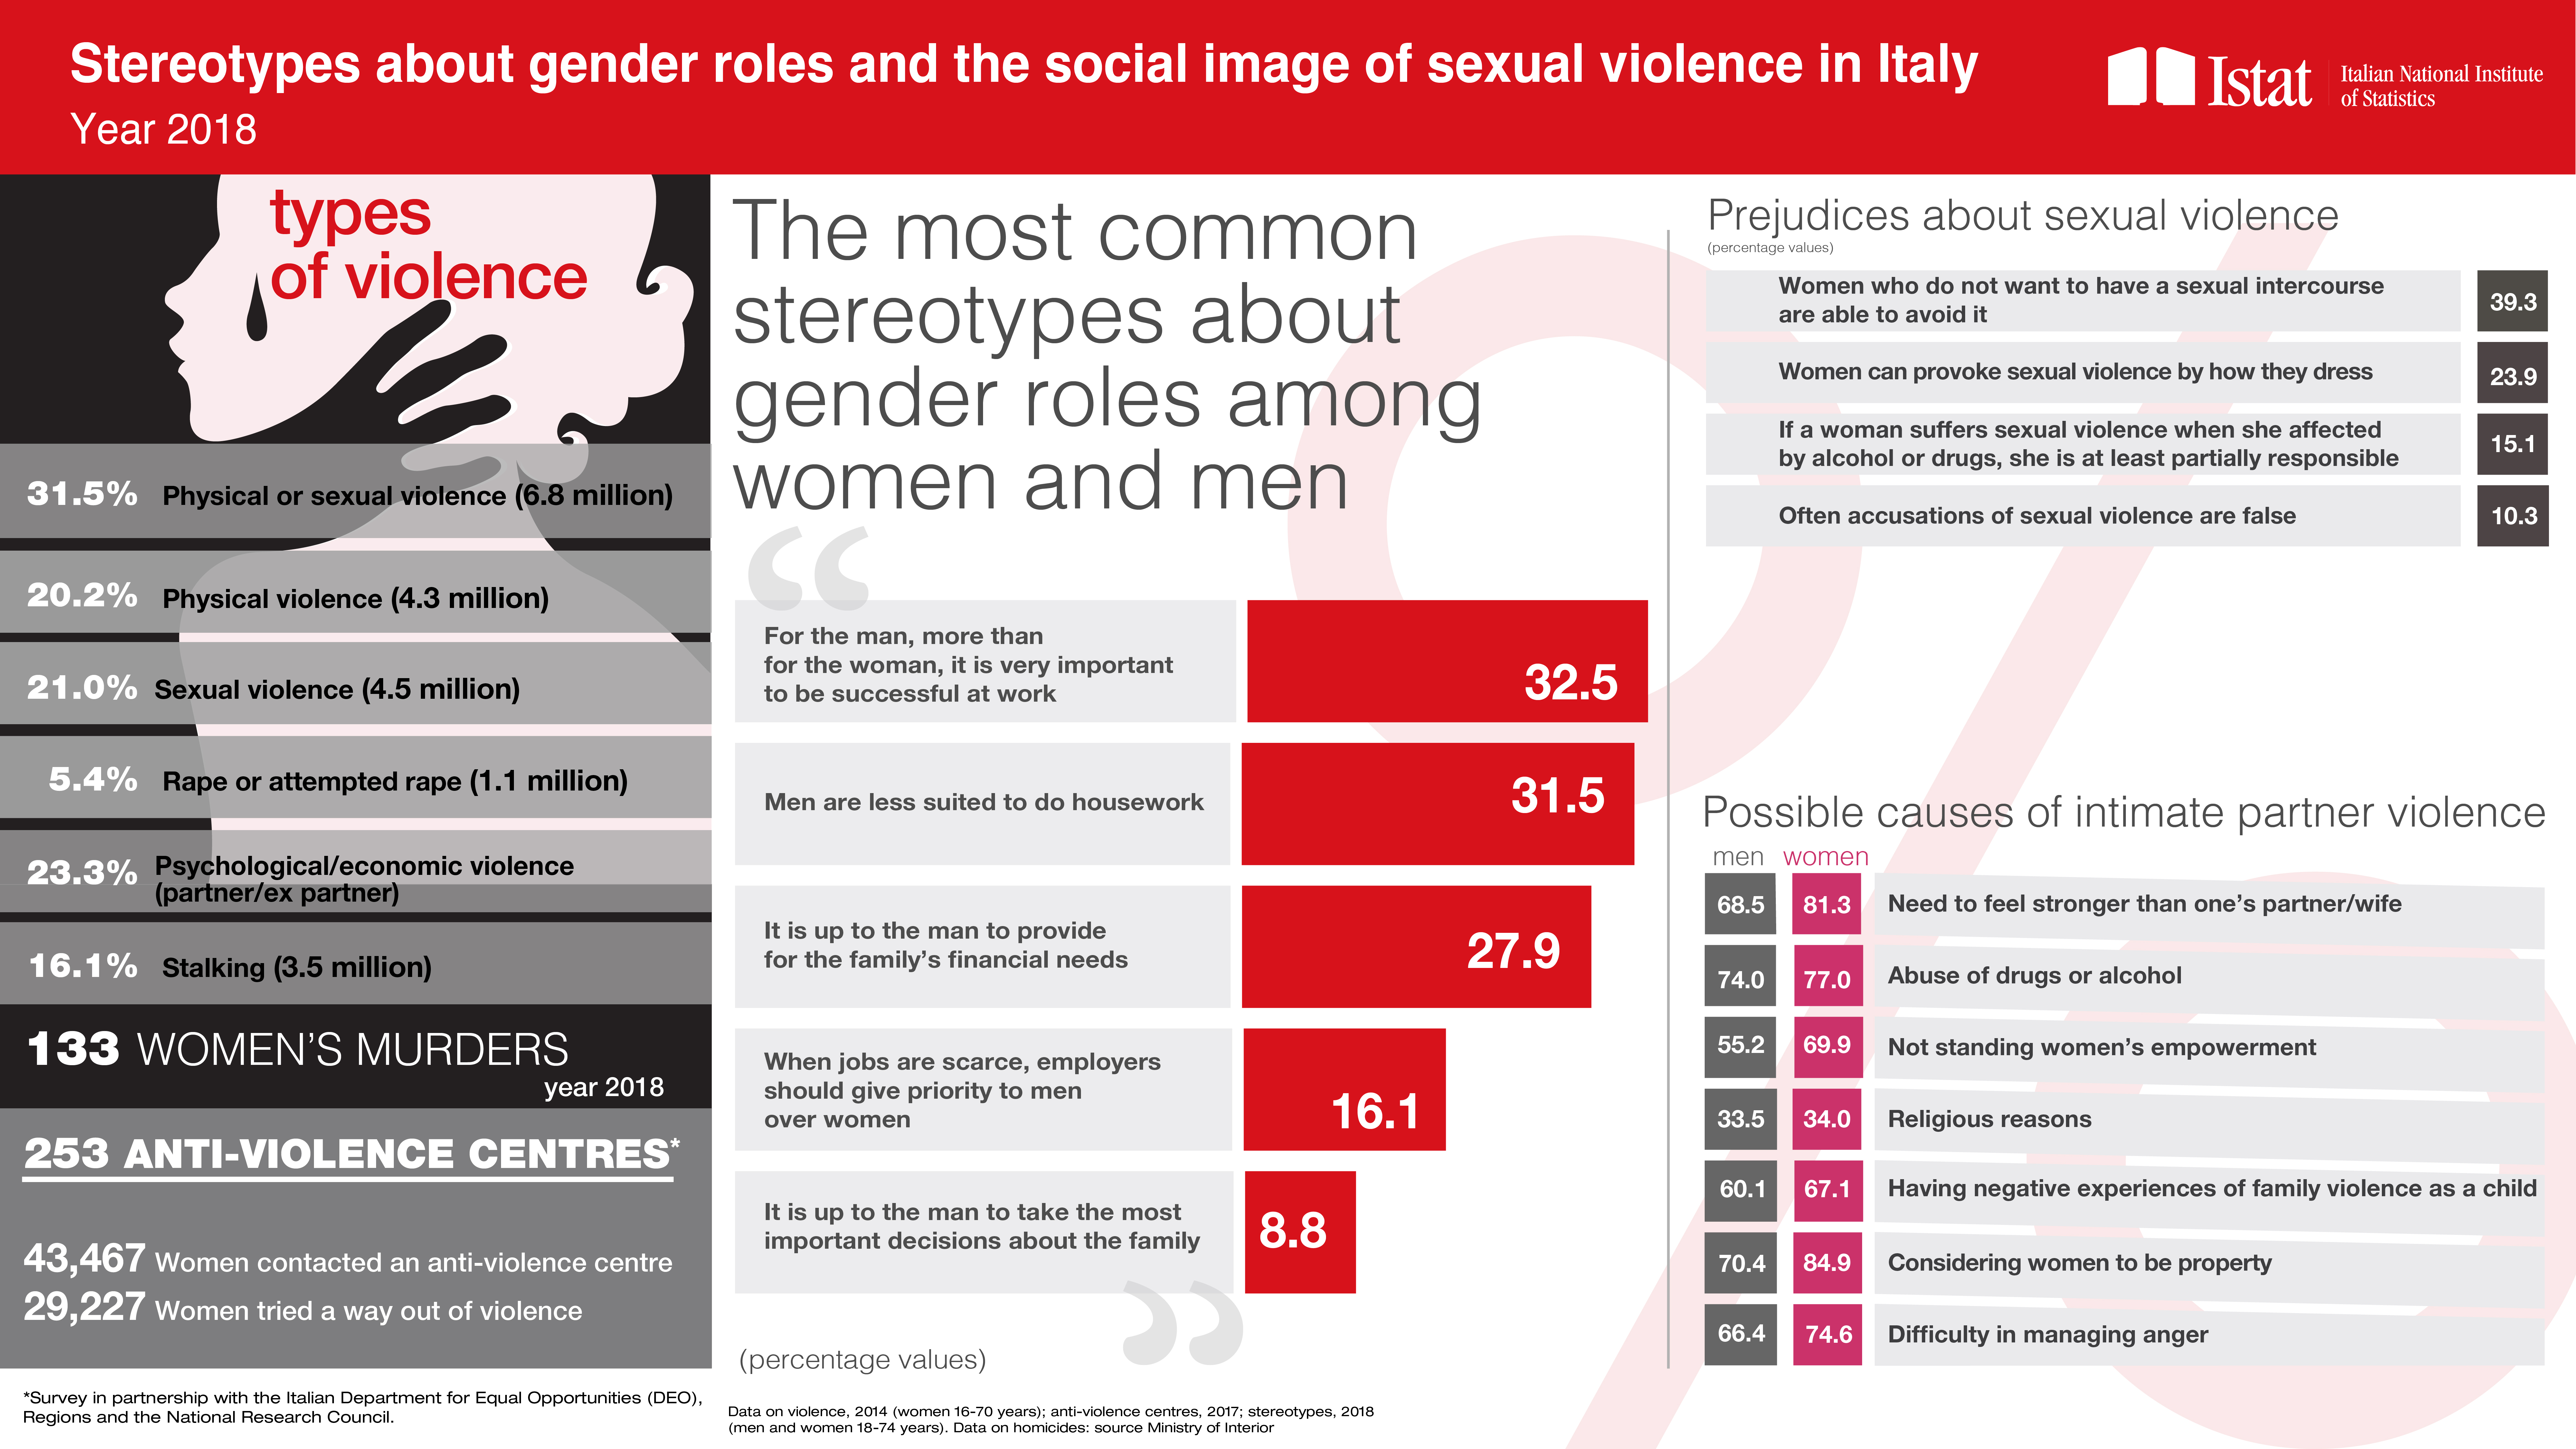 Stereotypes about gender roles and the social image of sexual violence in Italy